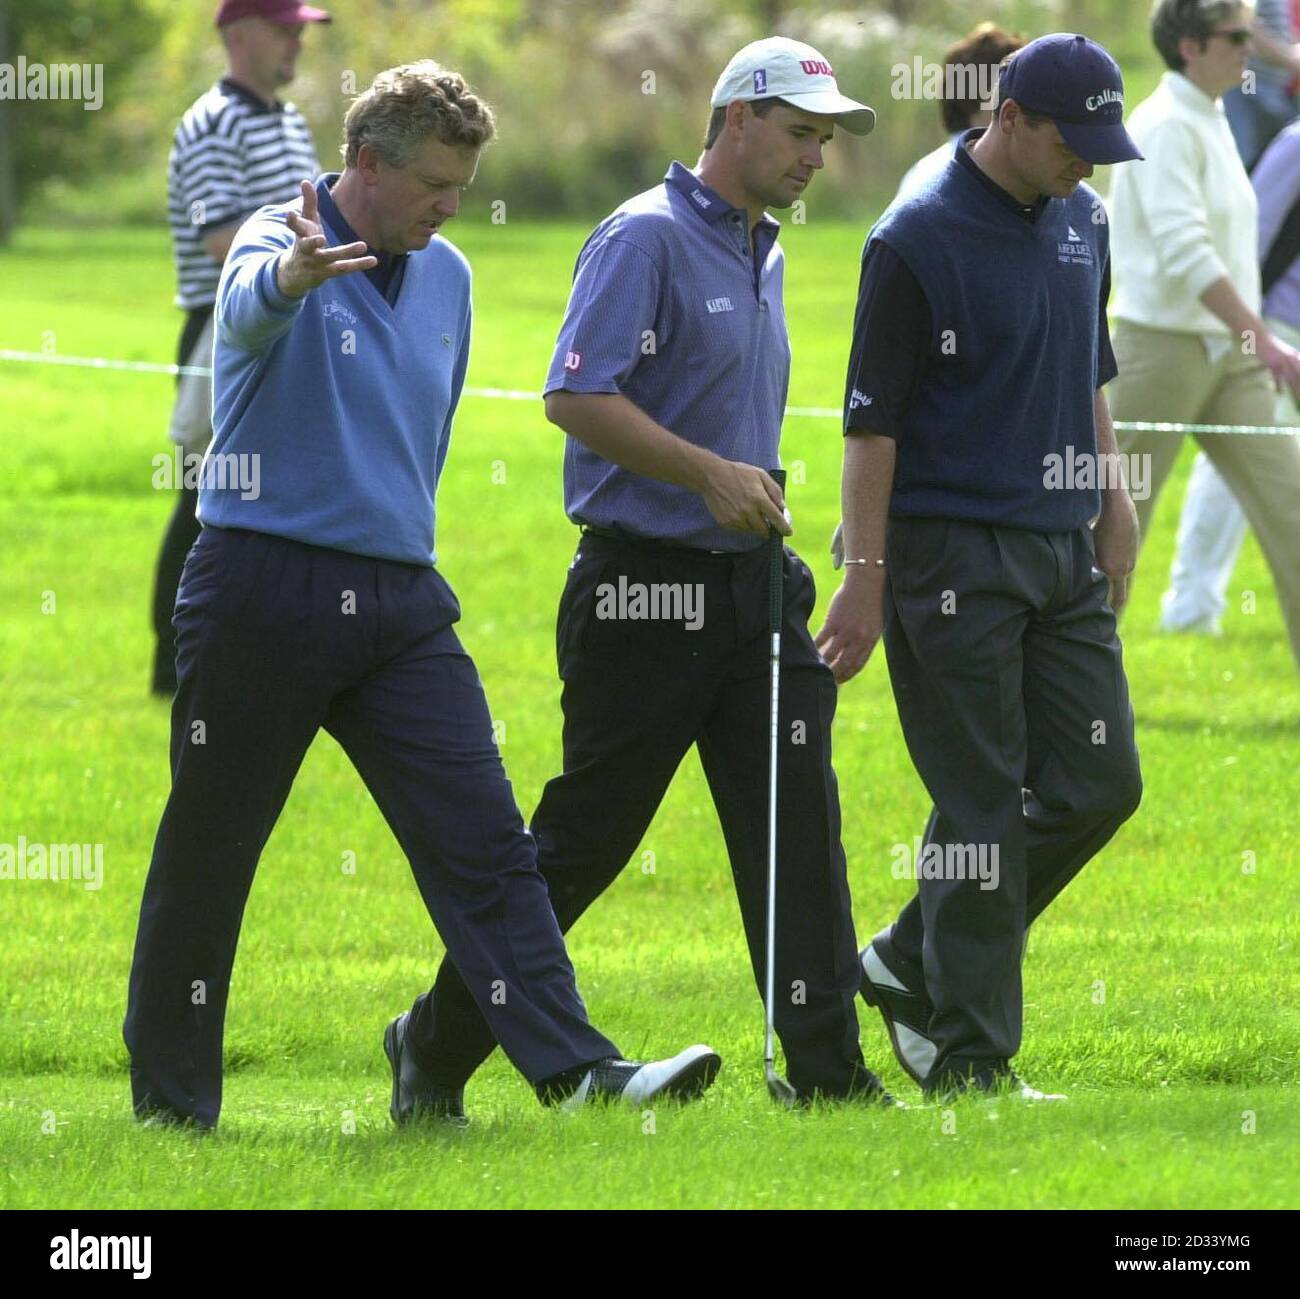 Left to right: Scotland's Colin Montgomerie, Ireland's Padraig Harrington and Scotland's Paul Lawrie during their practice round at Mount Juliet Golf Course, Co Kilkenny, Republic of Ireland in preparation for the 2002 American Express Championship.  Stock Photo